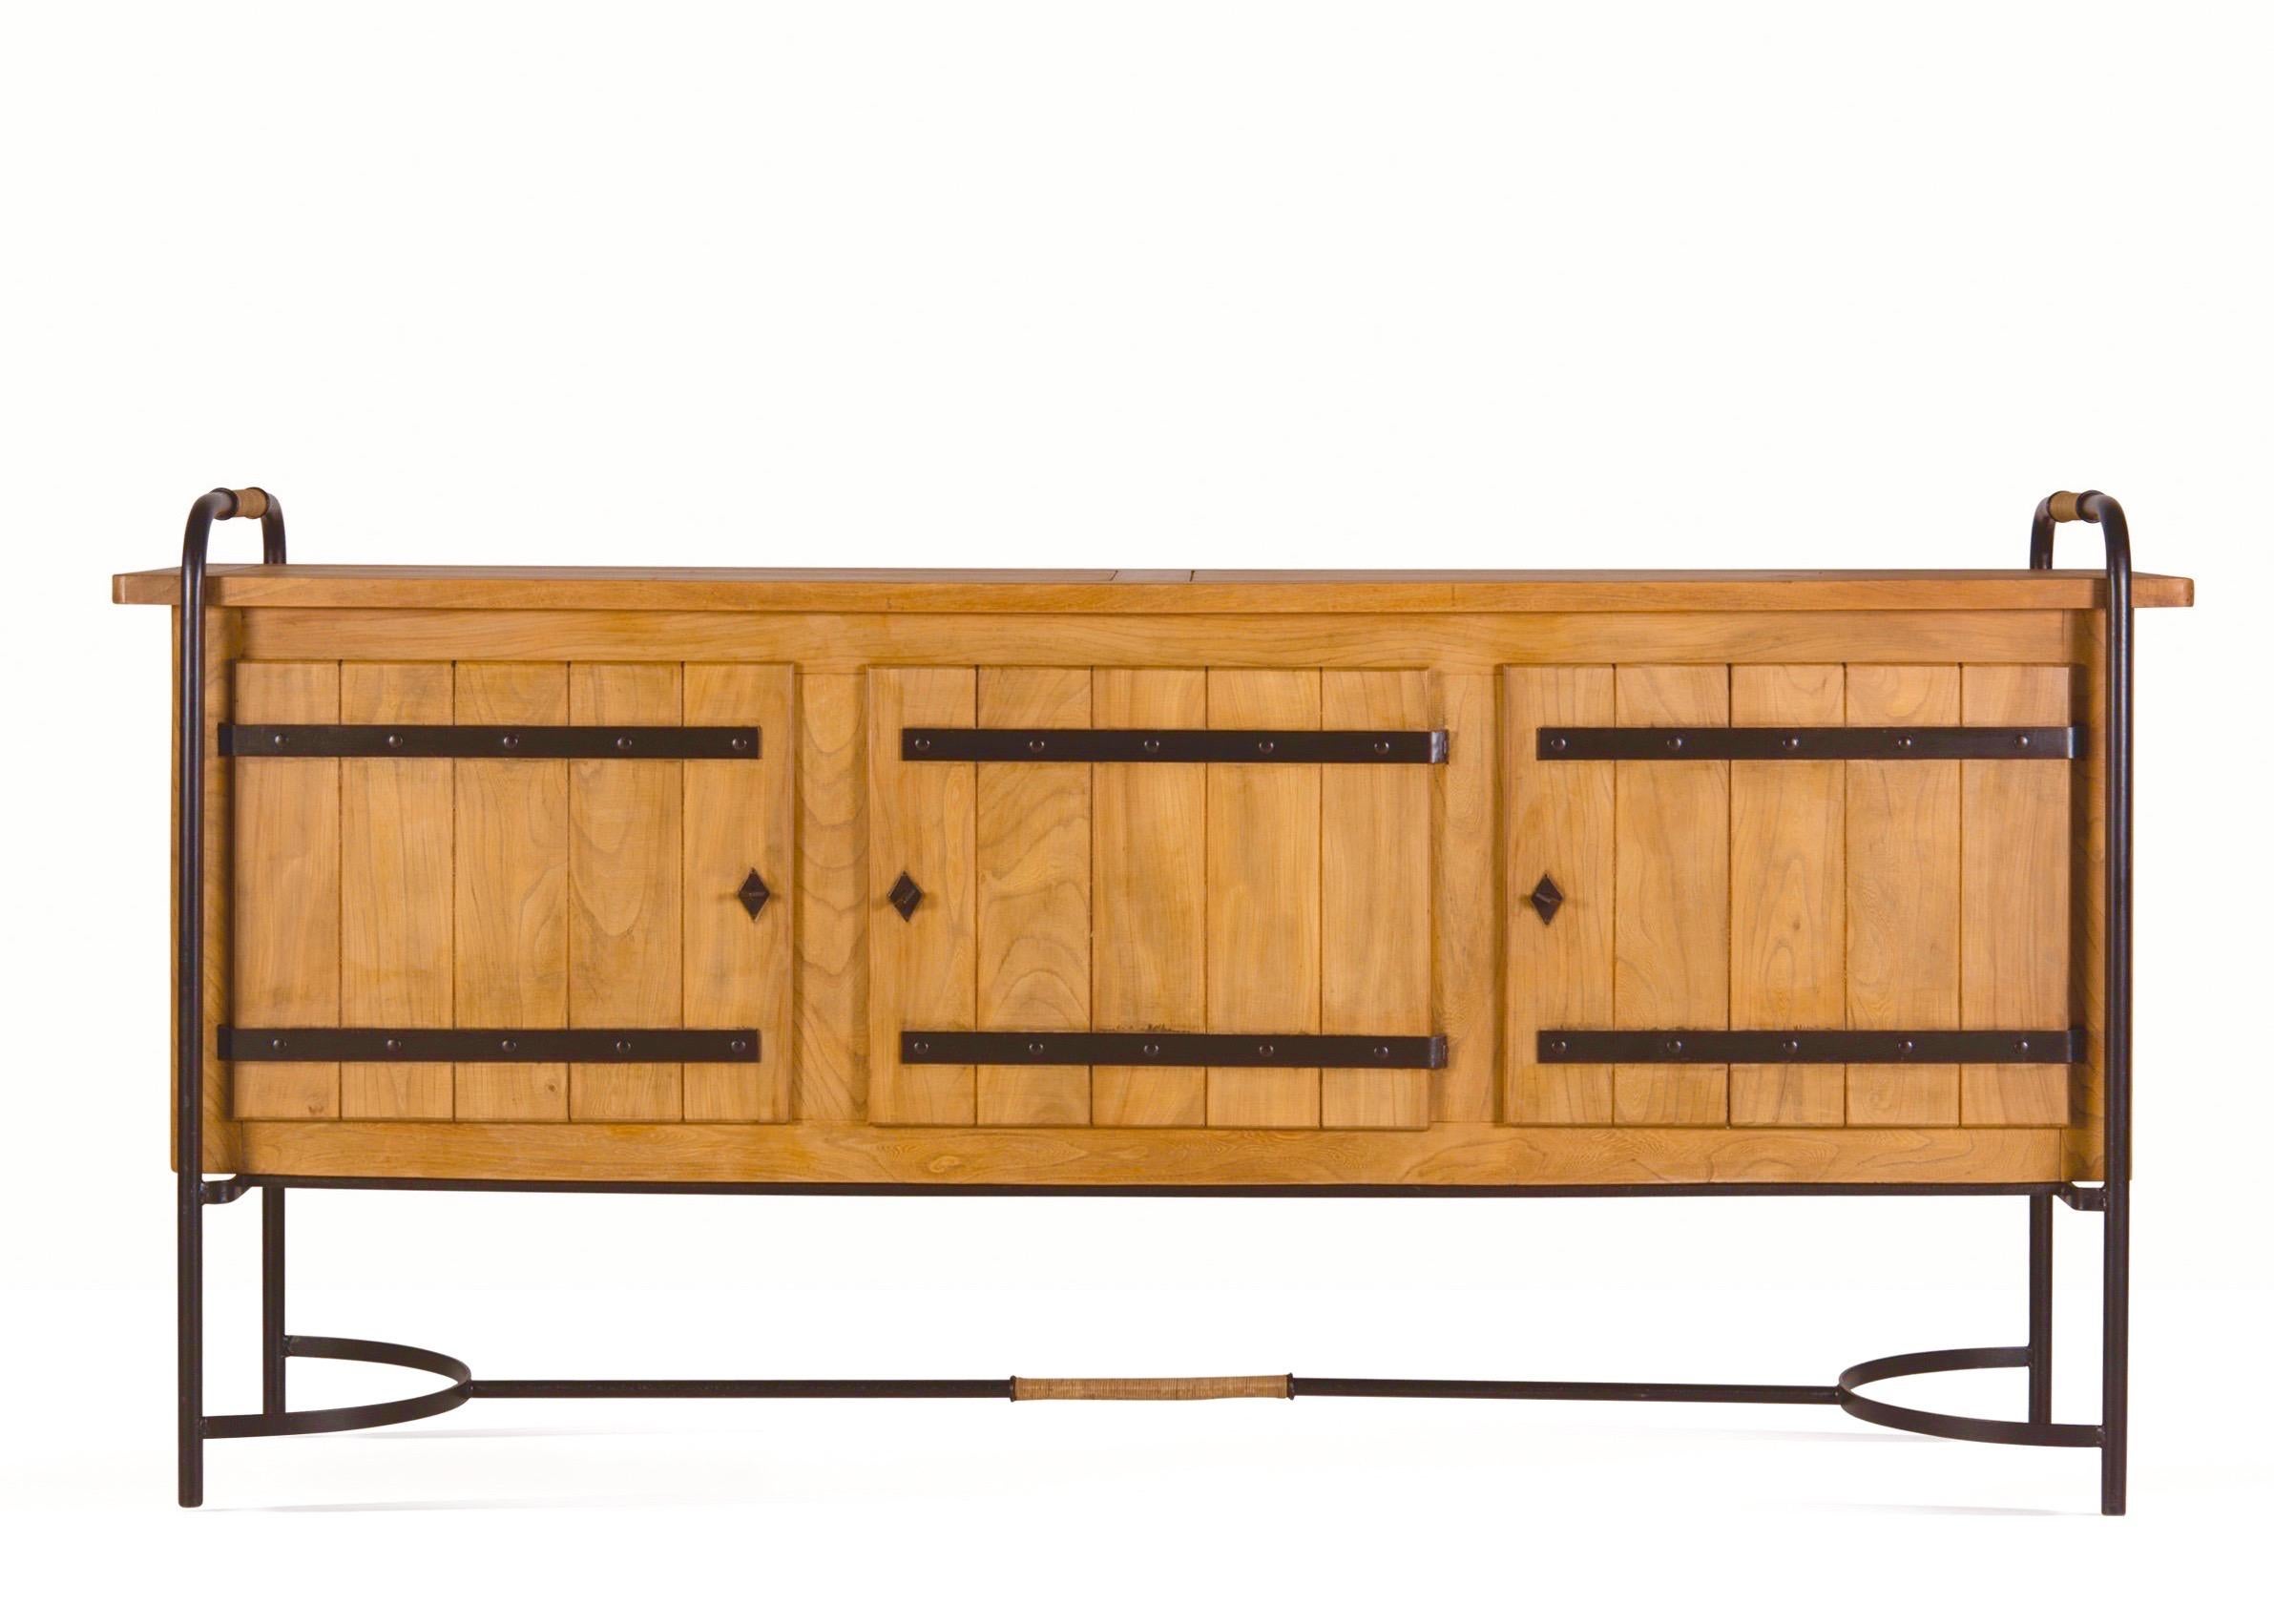 Jacques Adnet (1900–1984)

A very rare, massive, and beautiful three-door rustic sideboard by Jacques Adnet, in elm with curved wrought iron legs, equestrian nail detailing, and rattan elements on the handles and base. Three doors with original keys